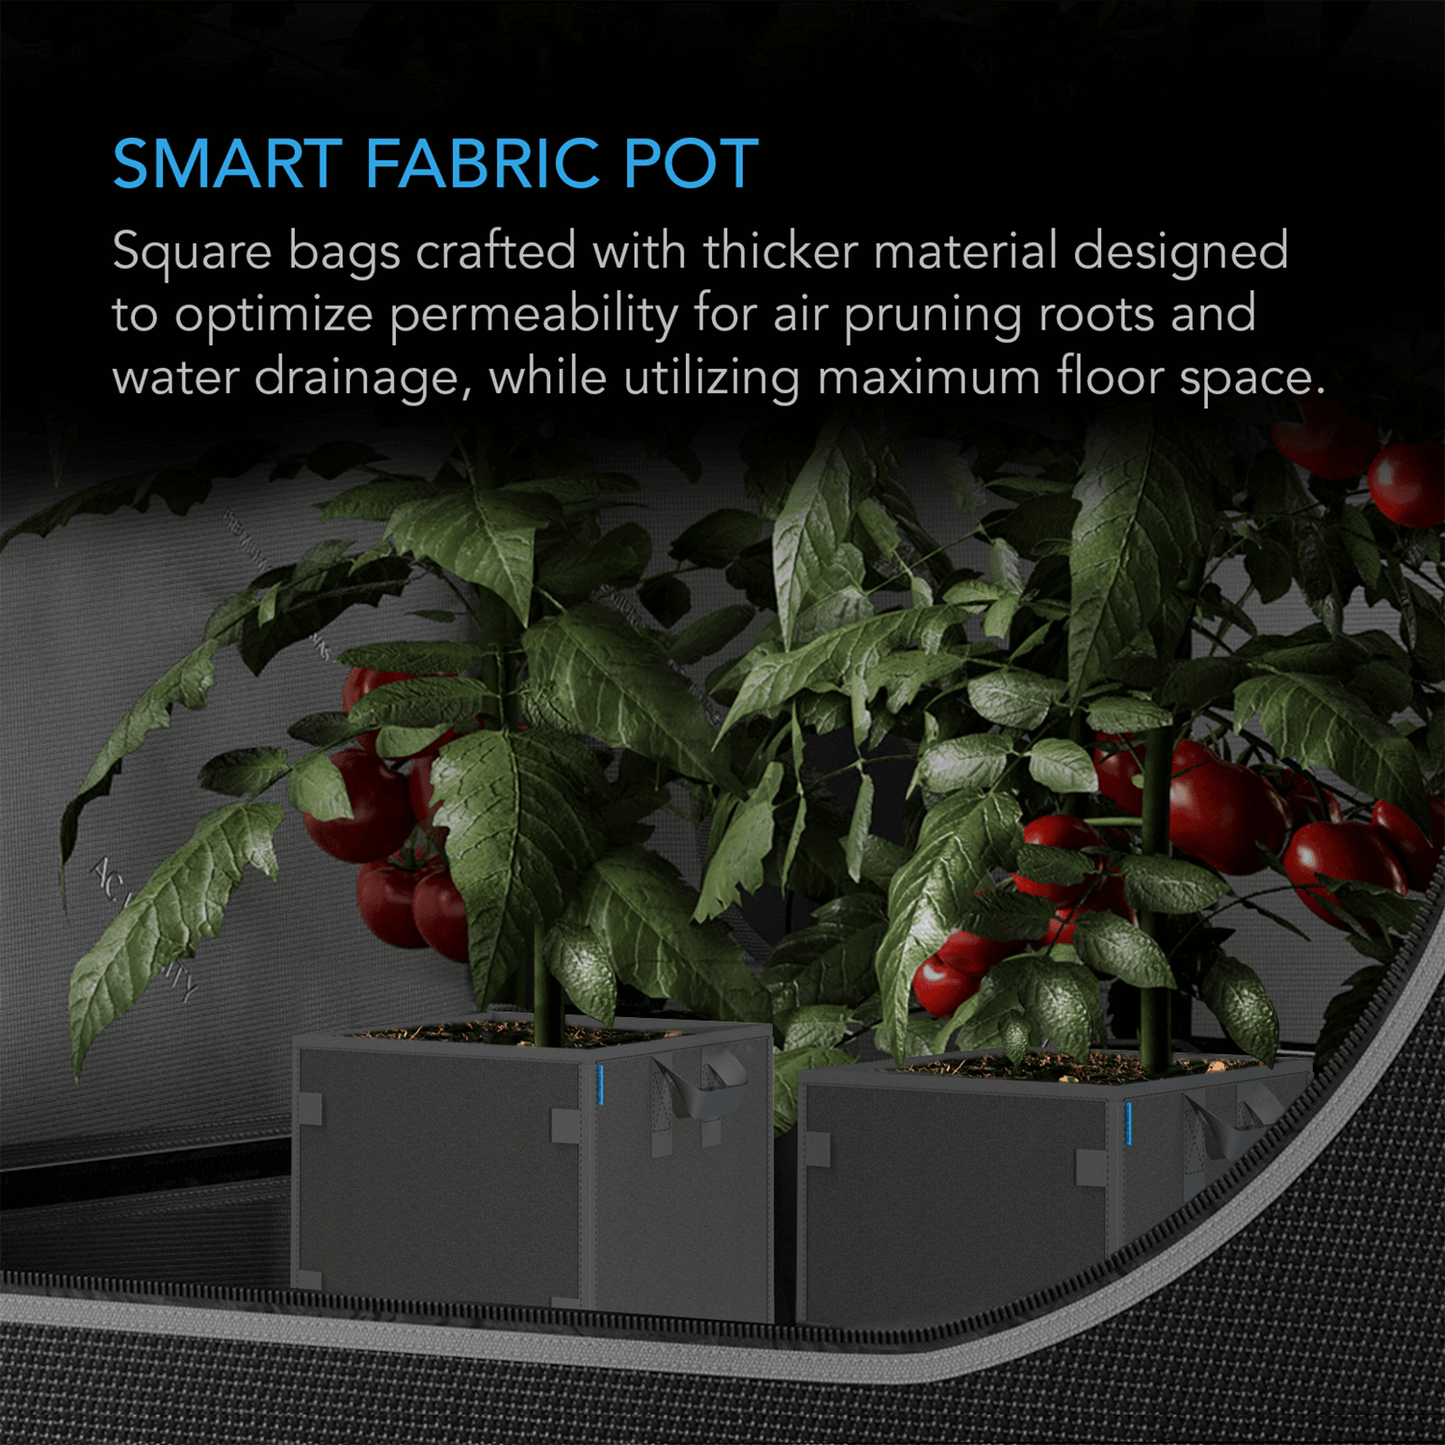 AC Infinity Heavy Duty Square Fabric Pots, 3 Gallon, 5-Pack | AC-SFP3 | Grow Tents Depot | Planting & Watering | 819137022621